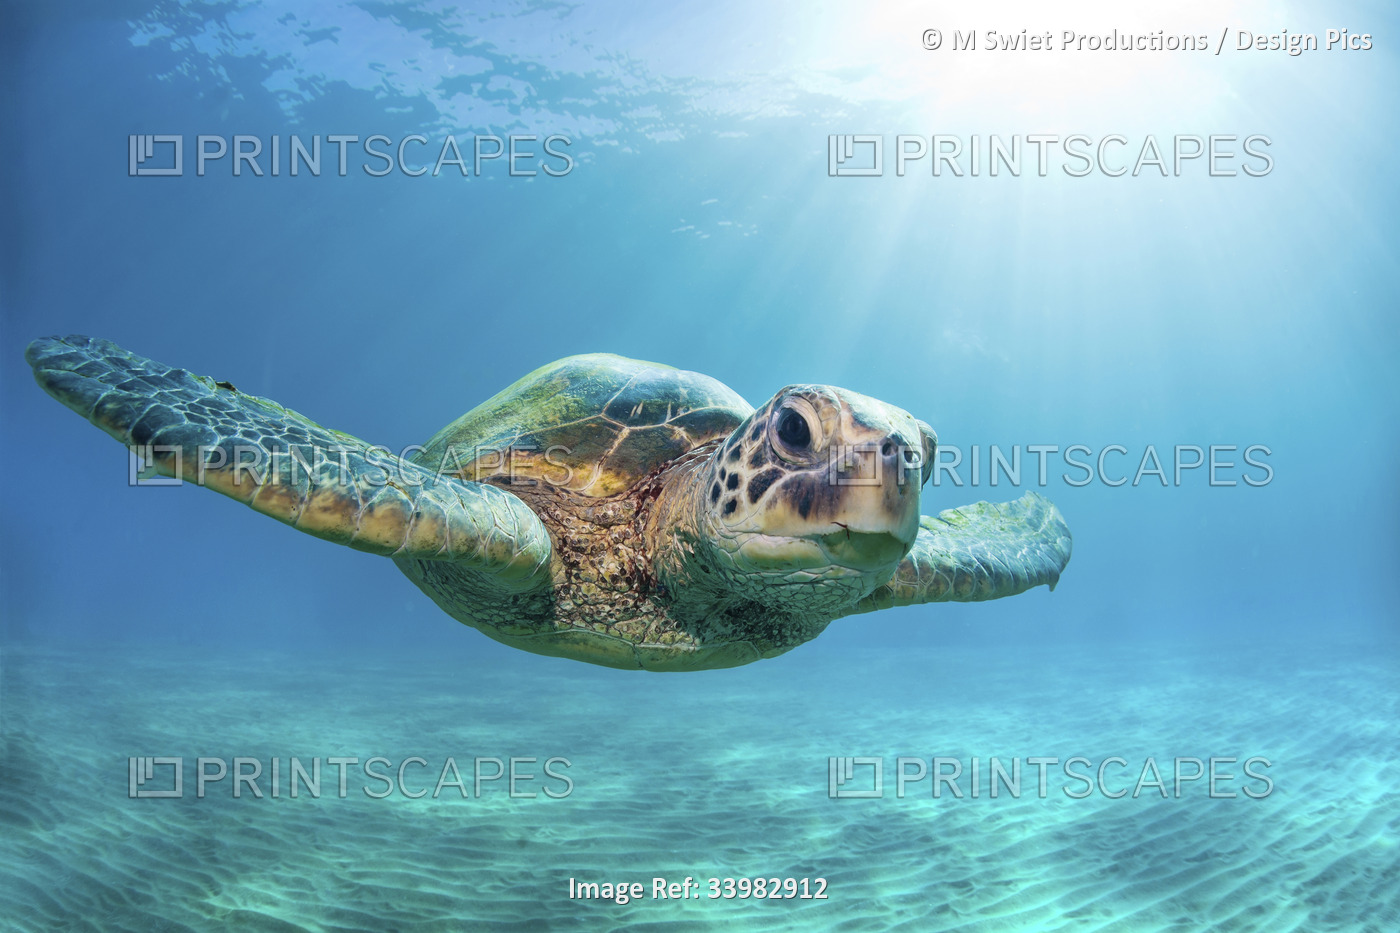 Close-up of a Green sea turtle (Chelonia mydas) swimming in turquoise waters ...